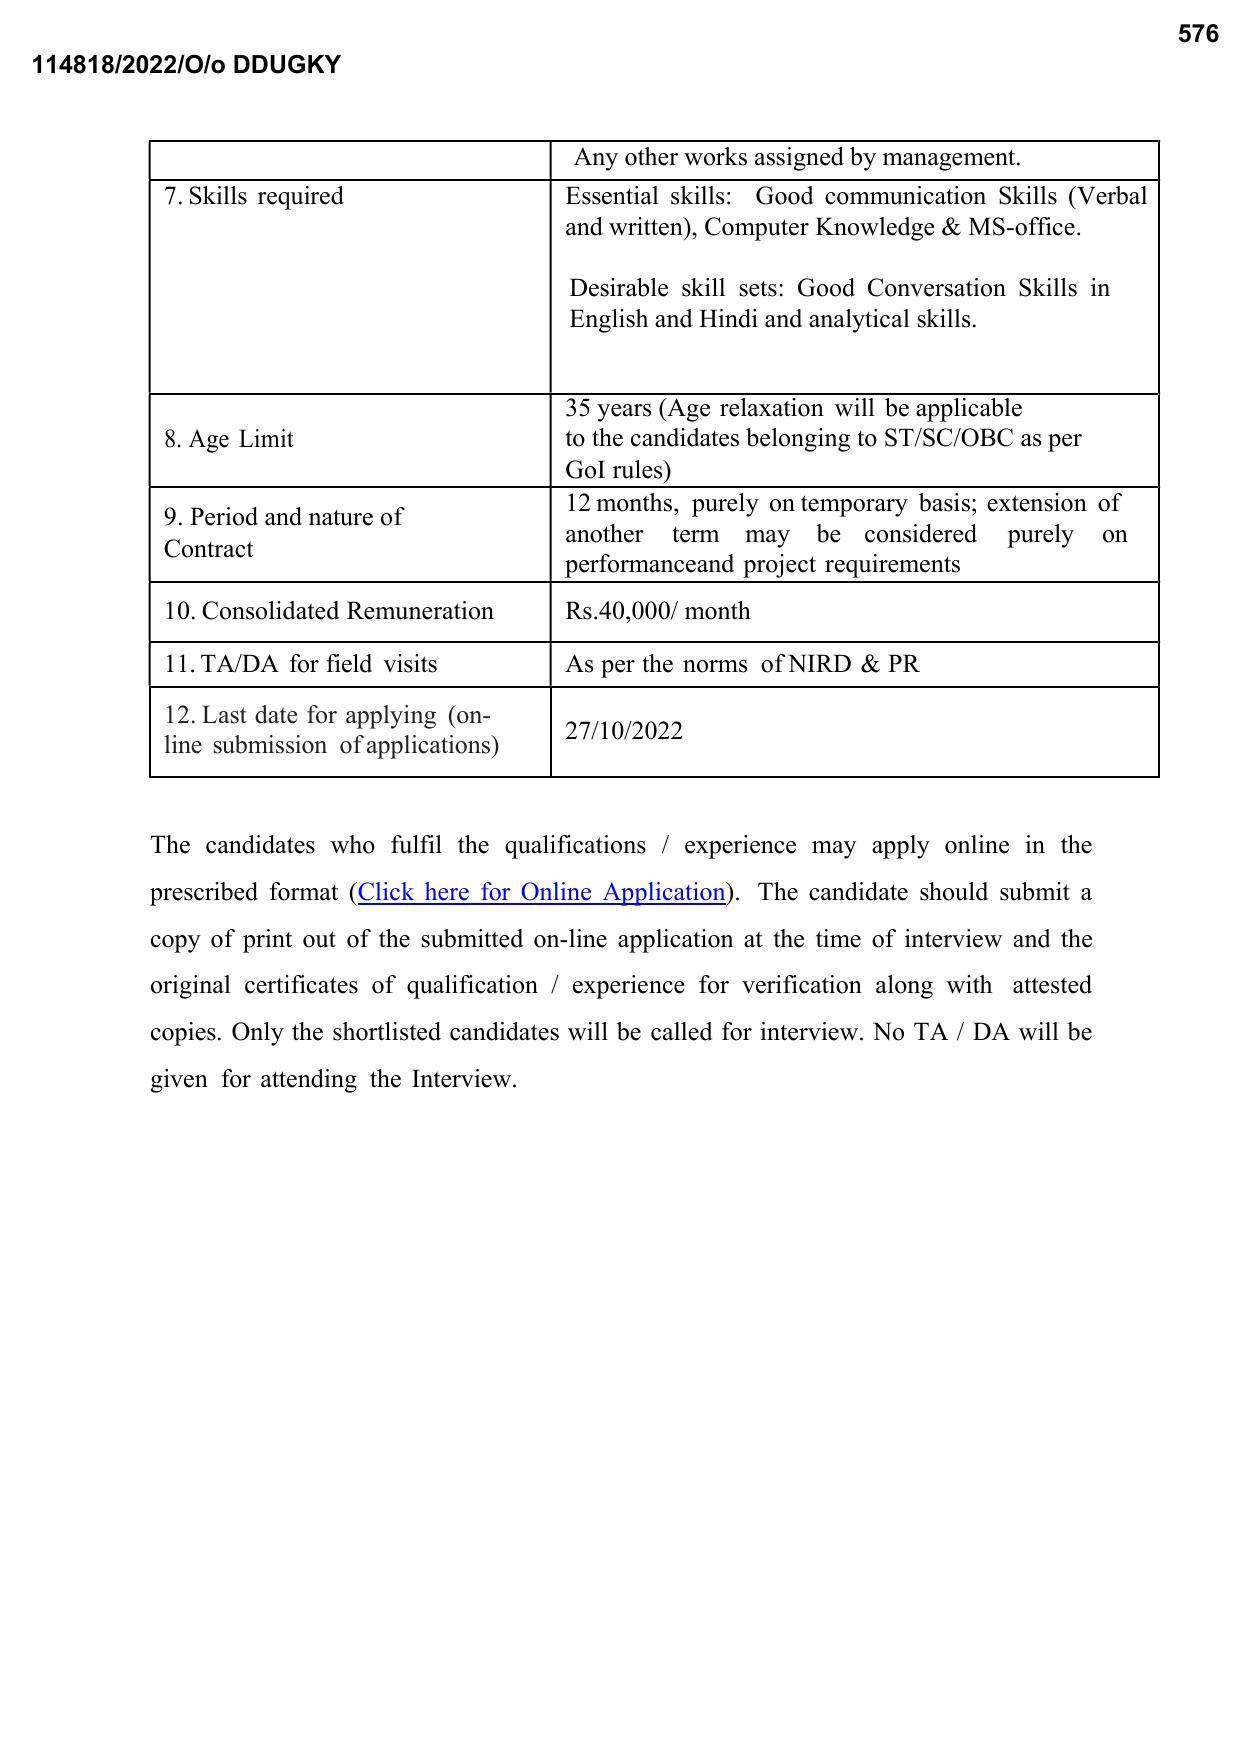 NIRD Invites Application for Developer, PHP Developer, More Vacancies Recruitment 2022 - Page 8